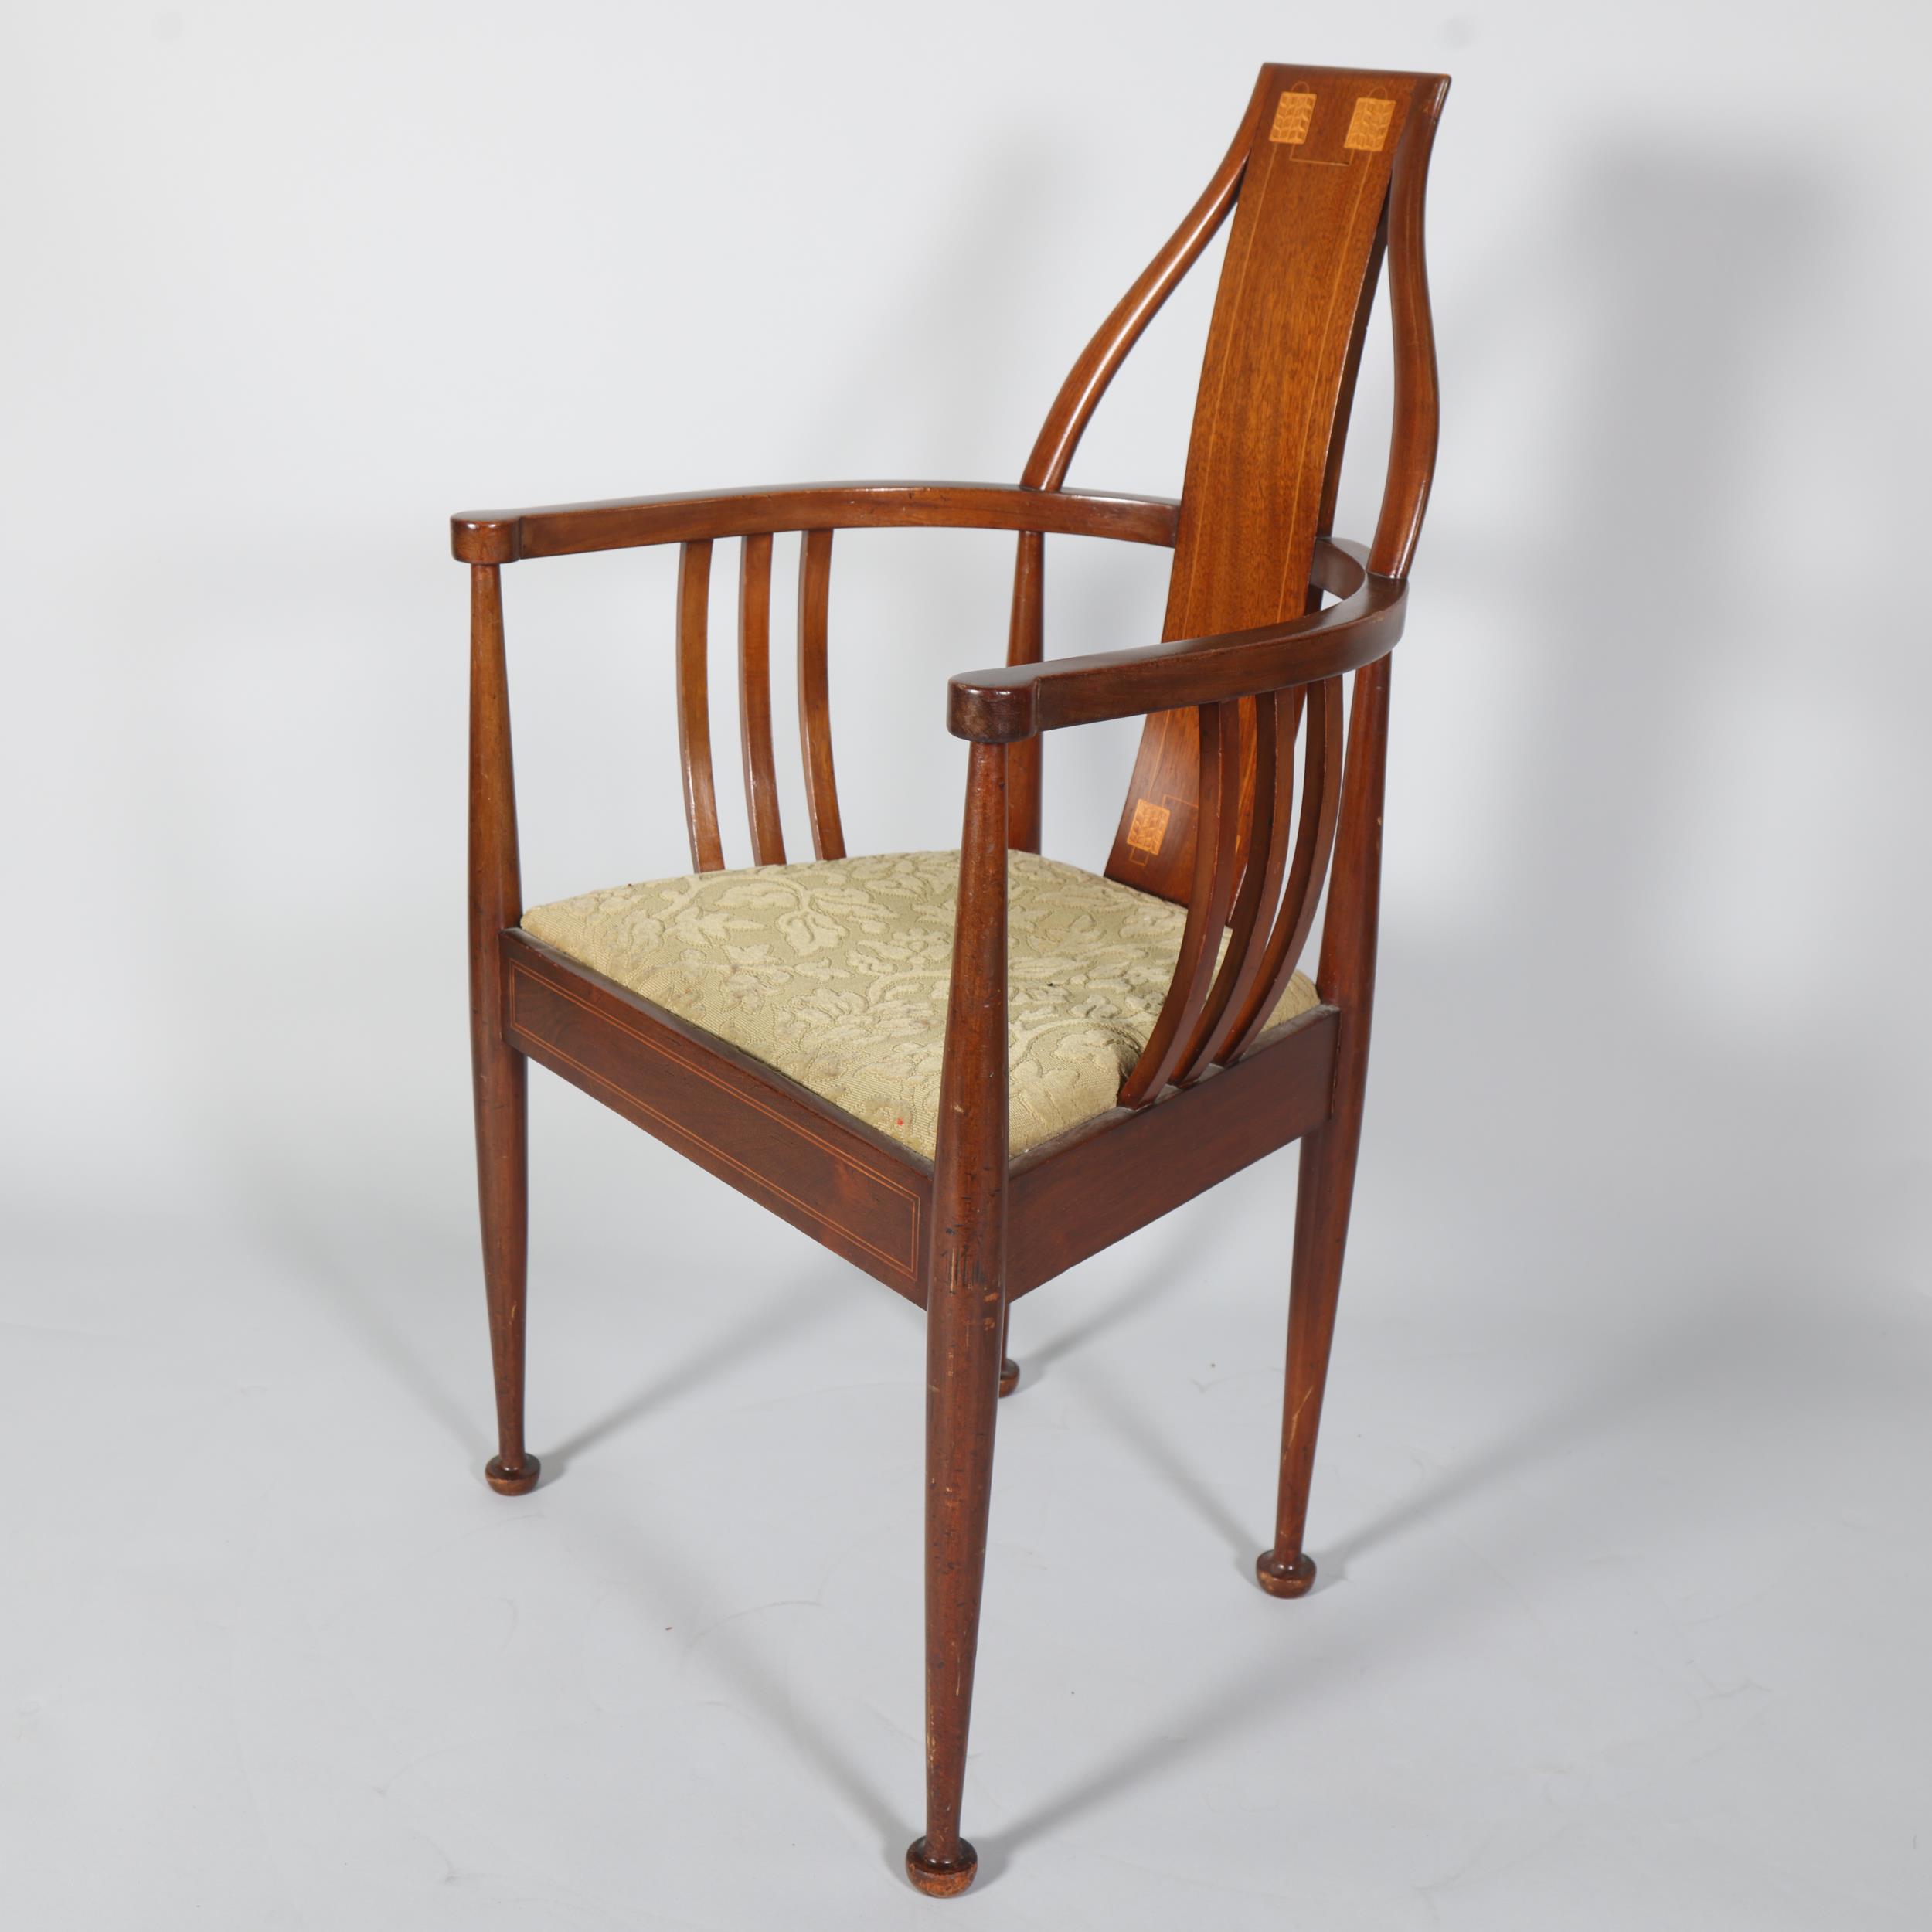 Scottish Art Nouveau mahogany bow-arm hall chair, with marquetry inlaid back, height 97cm - Image 3 of 5